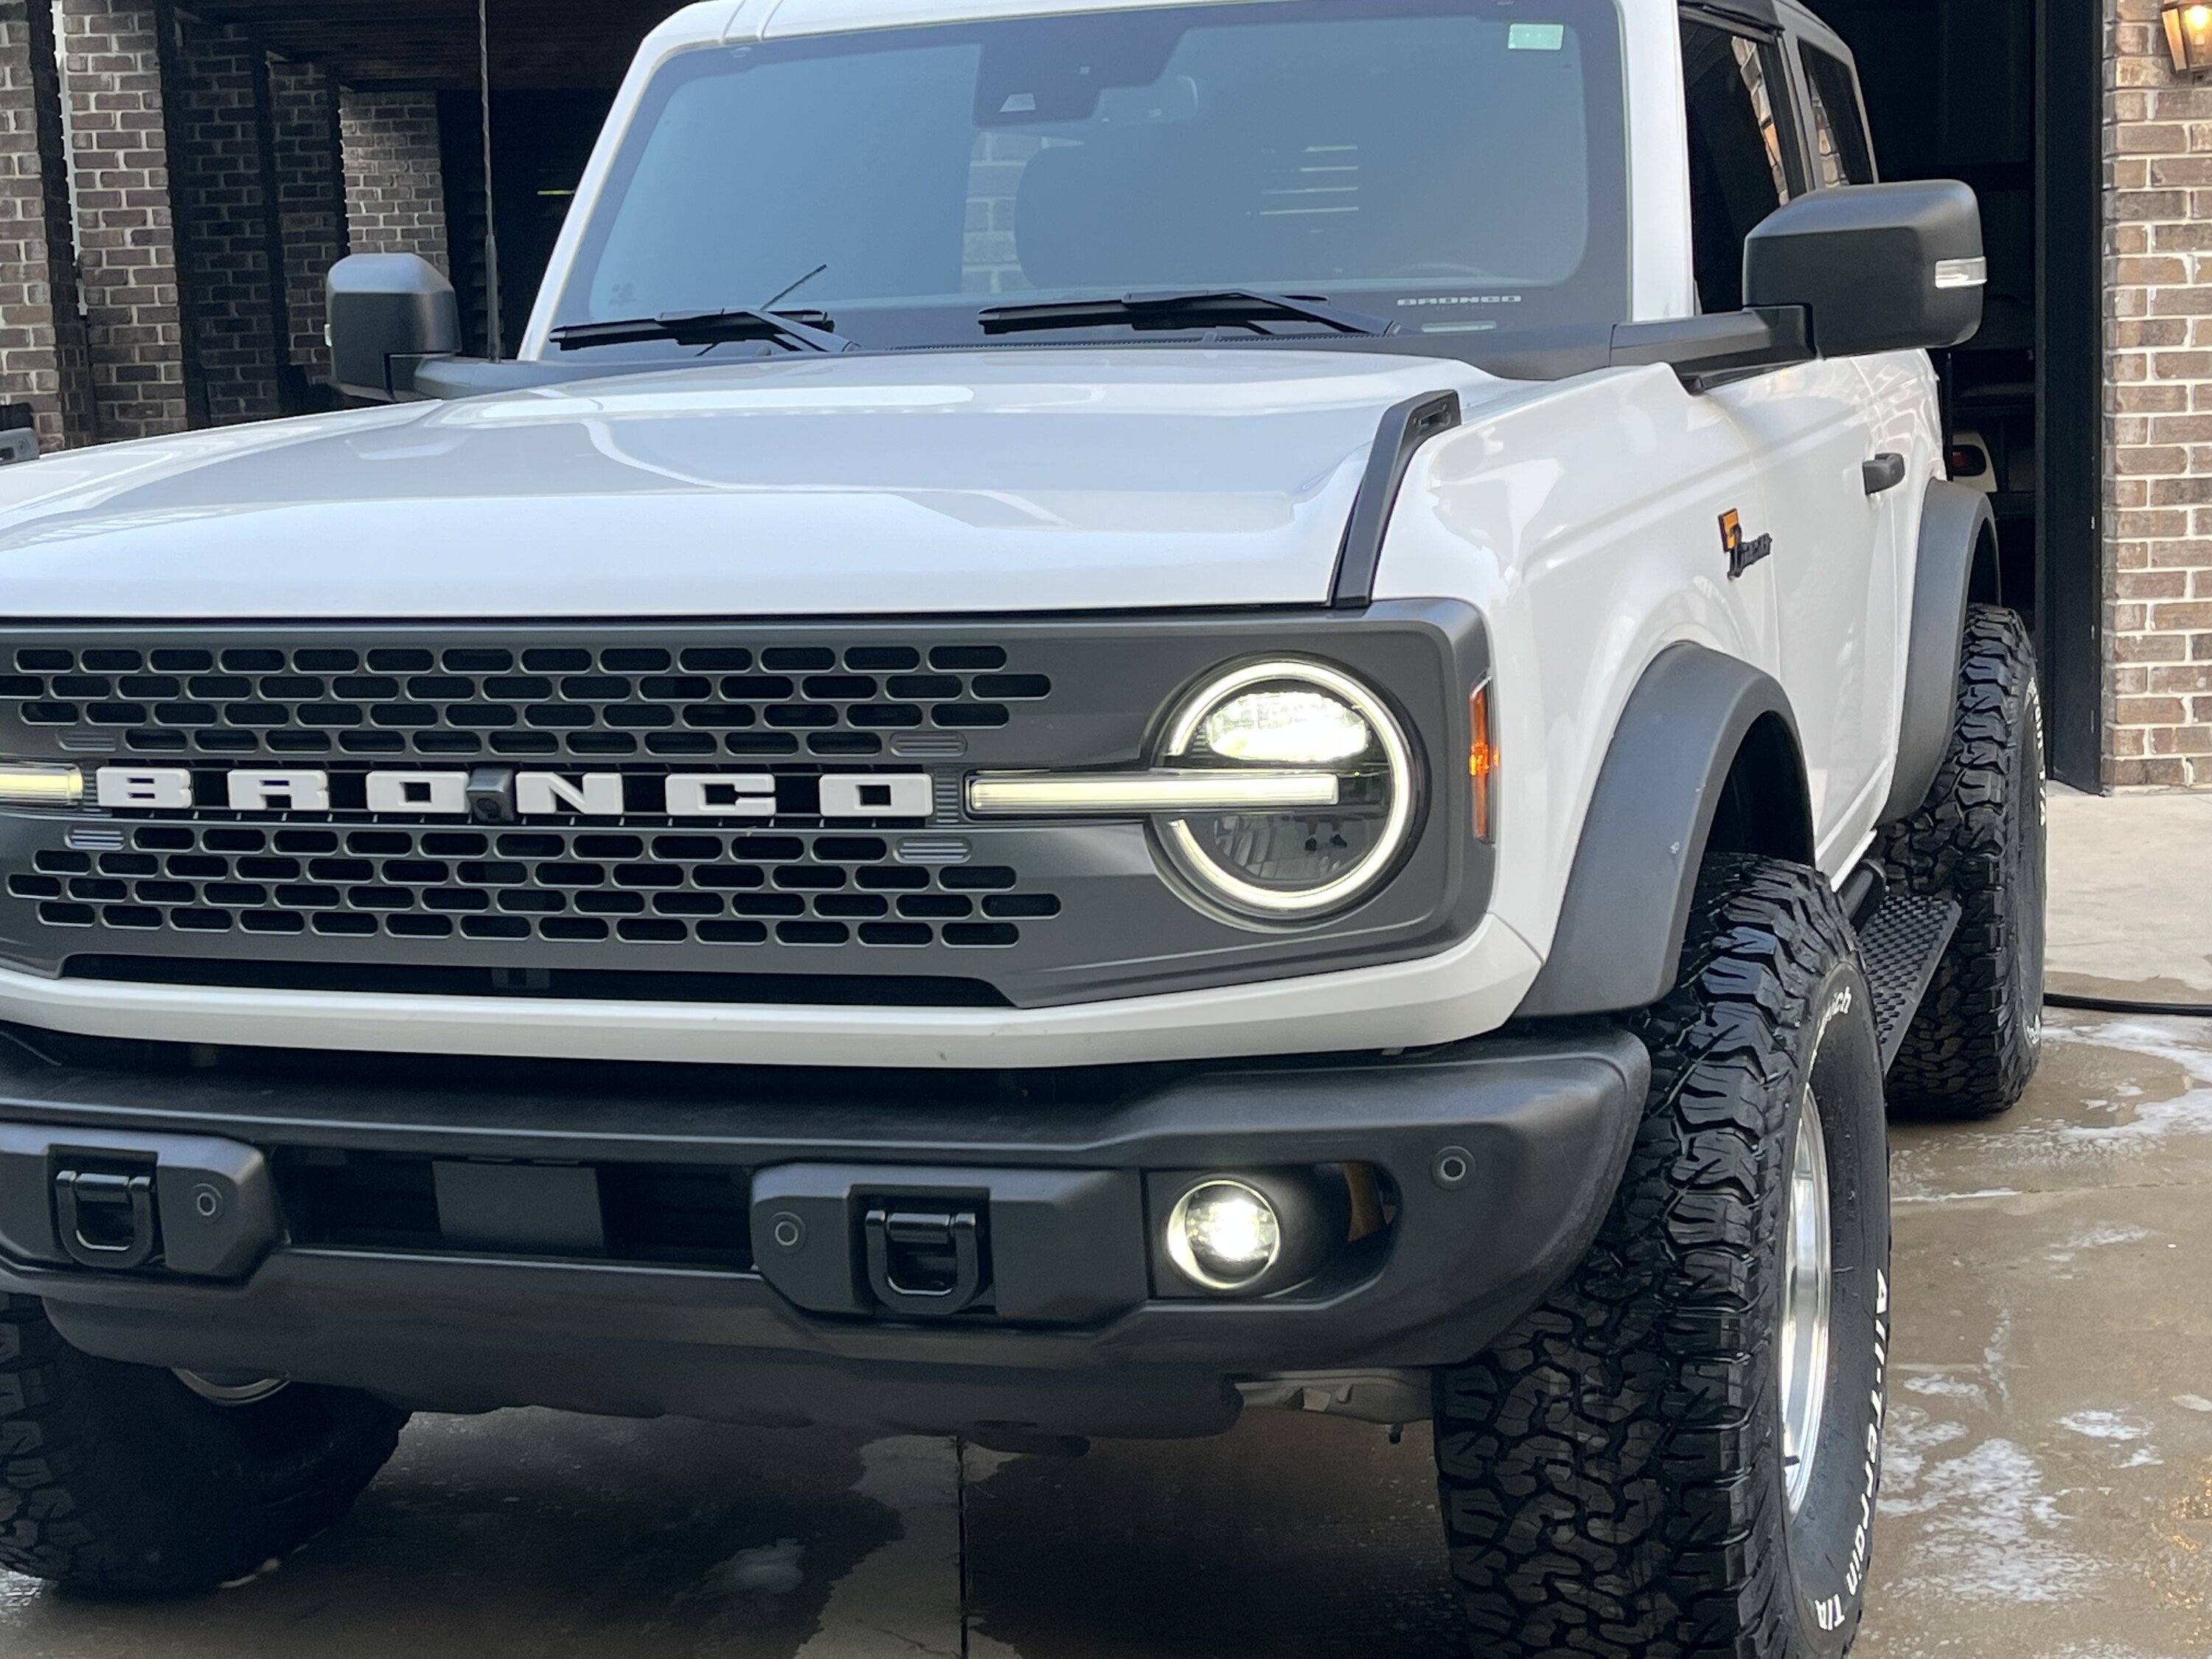 Ford Bronco "Old School" Classic Bronco Looks [Photos Edition] -- post pics of your build! White Roof3